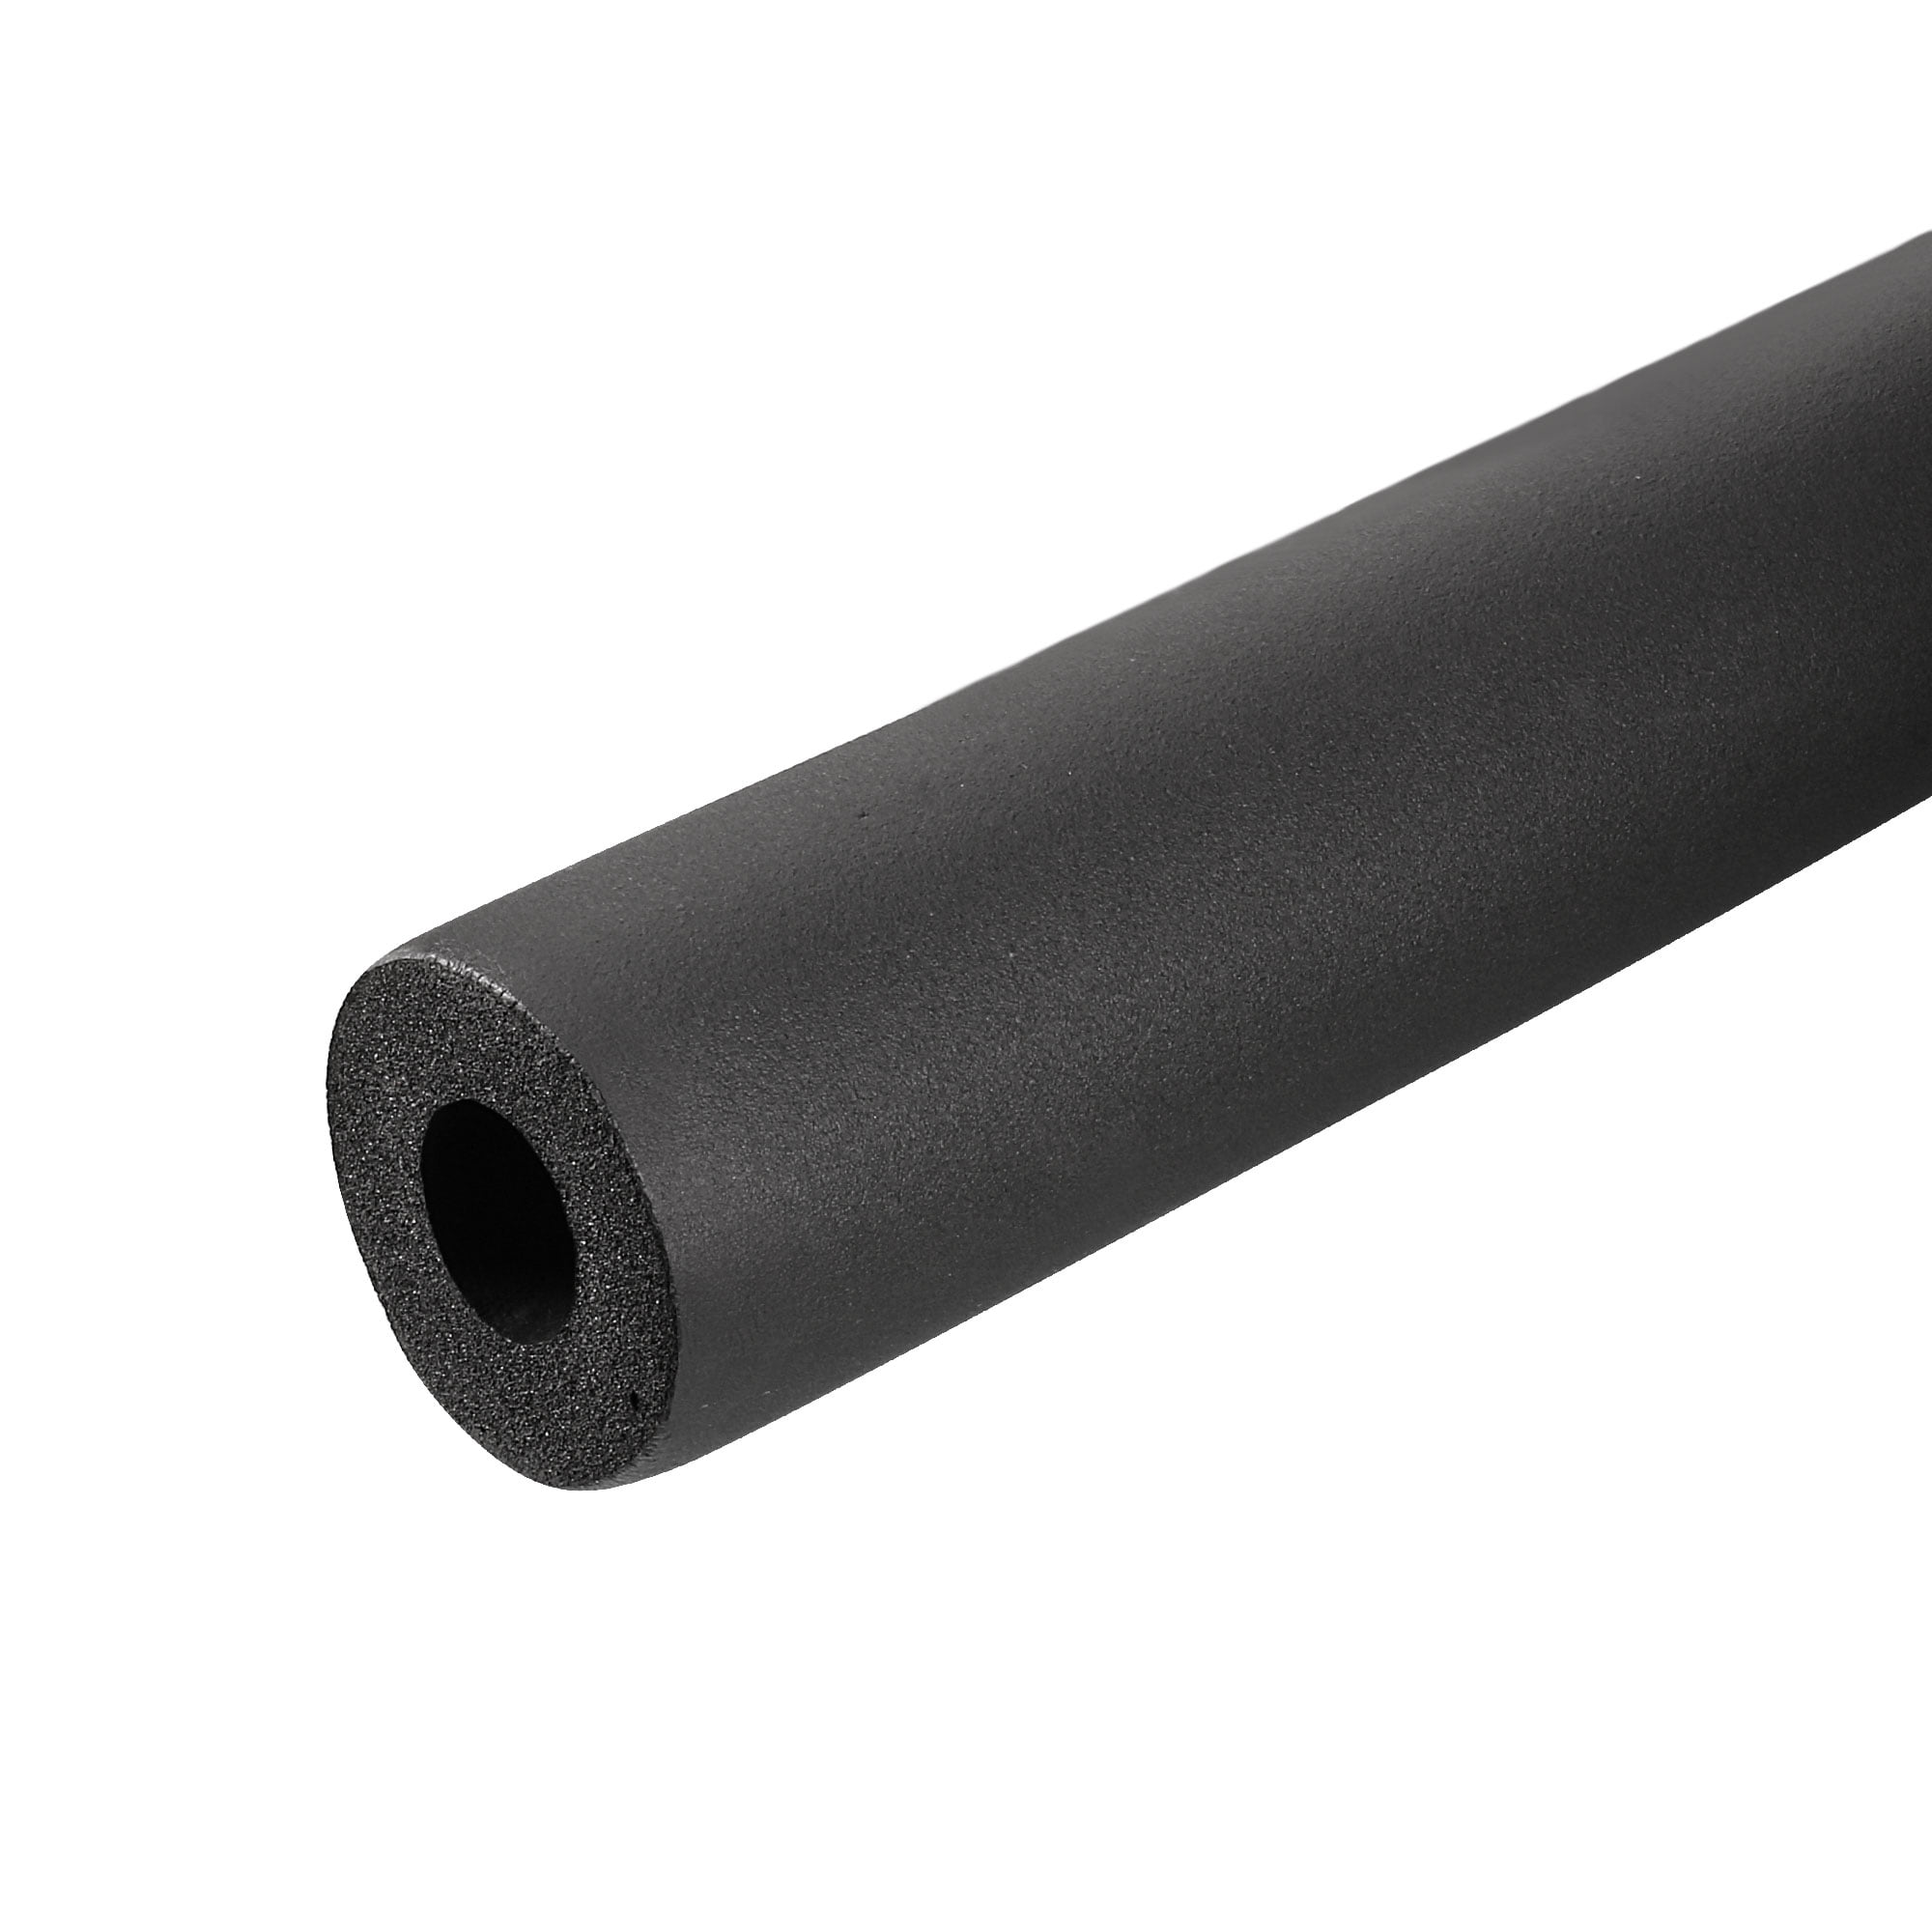 54MM OR 2 1/8 I.D X 13MM 1/2 WALL AIRCON PIPE FIRE RATED INSULATION 2M LENGTH 